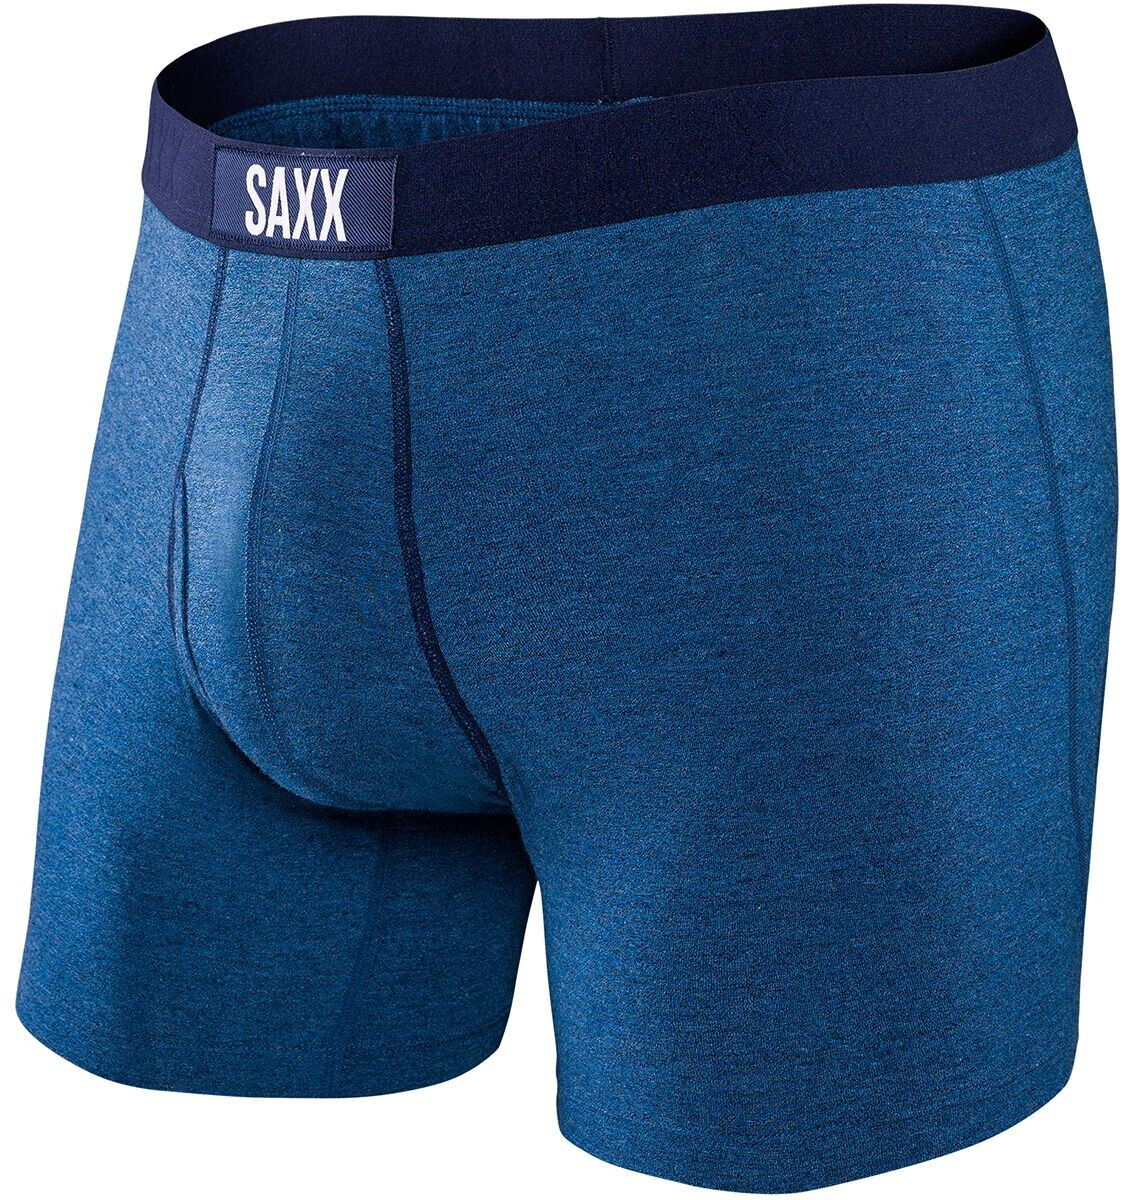 Buy Saxx Underwear Ultra Boxer blue from £17.50 (Today) – Best Deals on ...